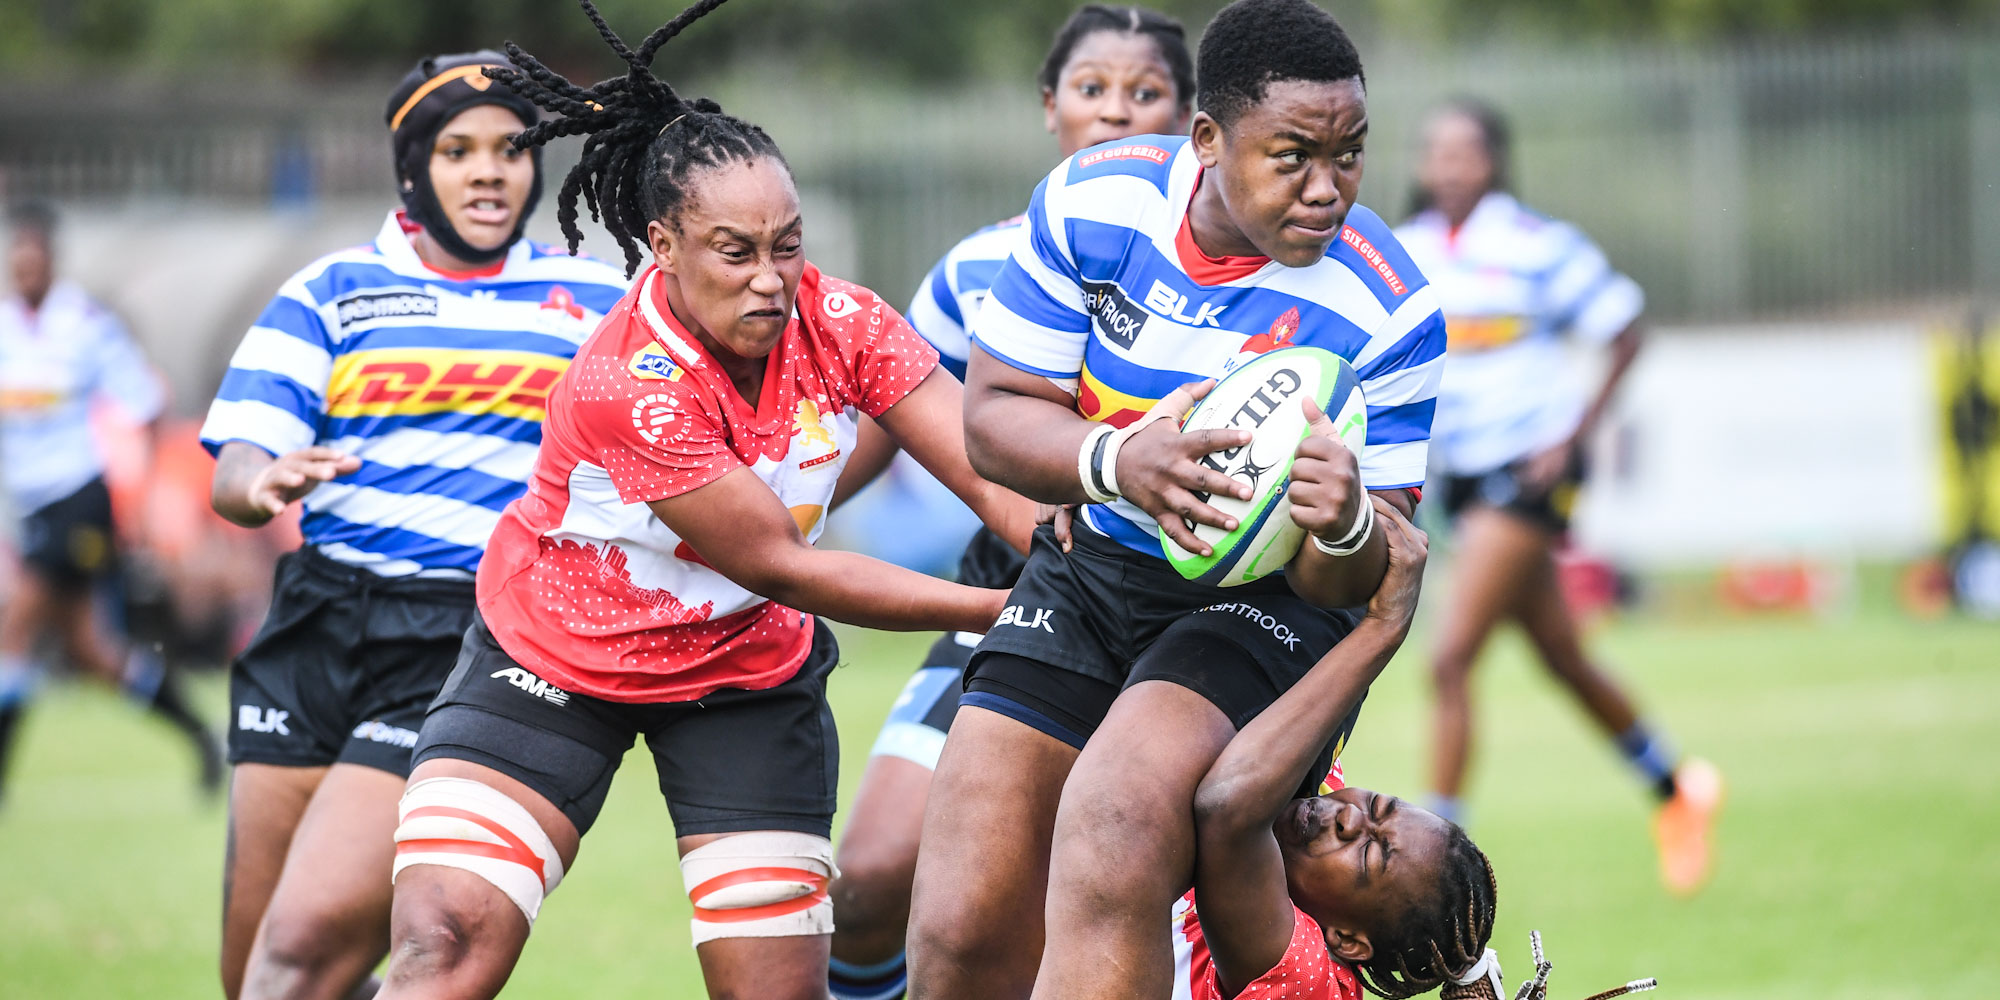 Babalwa Latsha carried strongly for DHL WP in their match against the Mastercard Golden Lions Women.